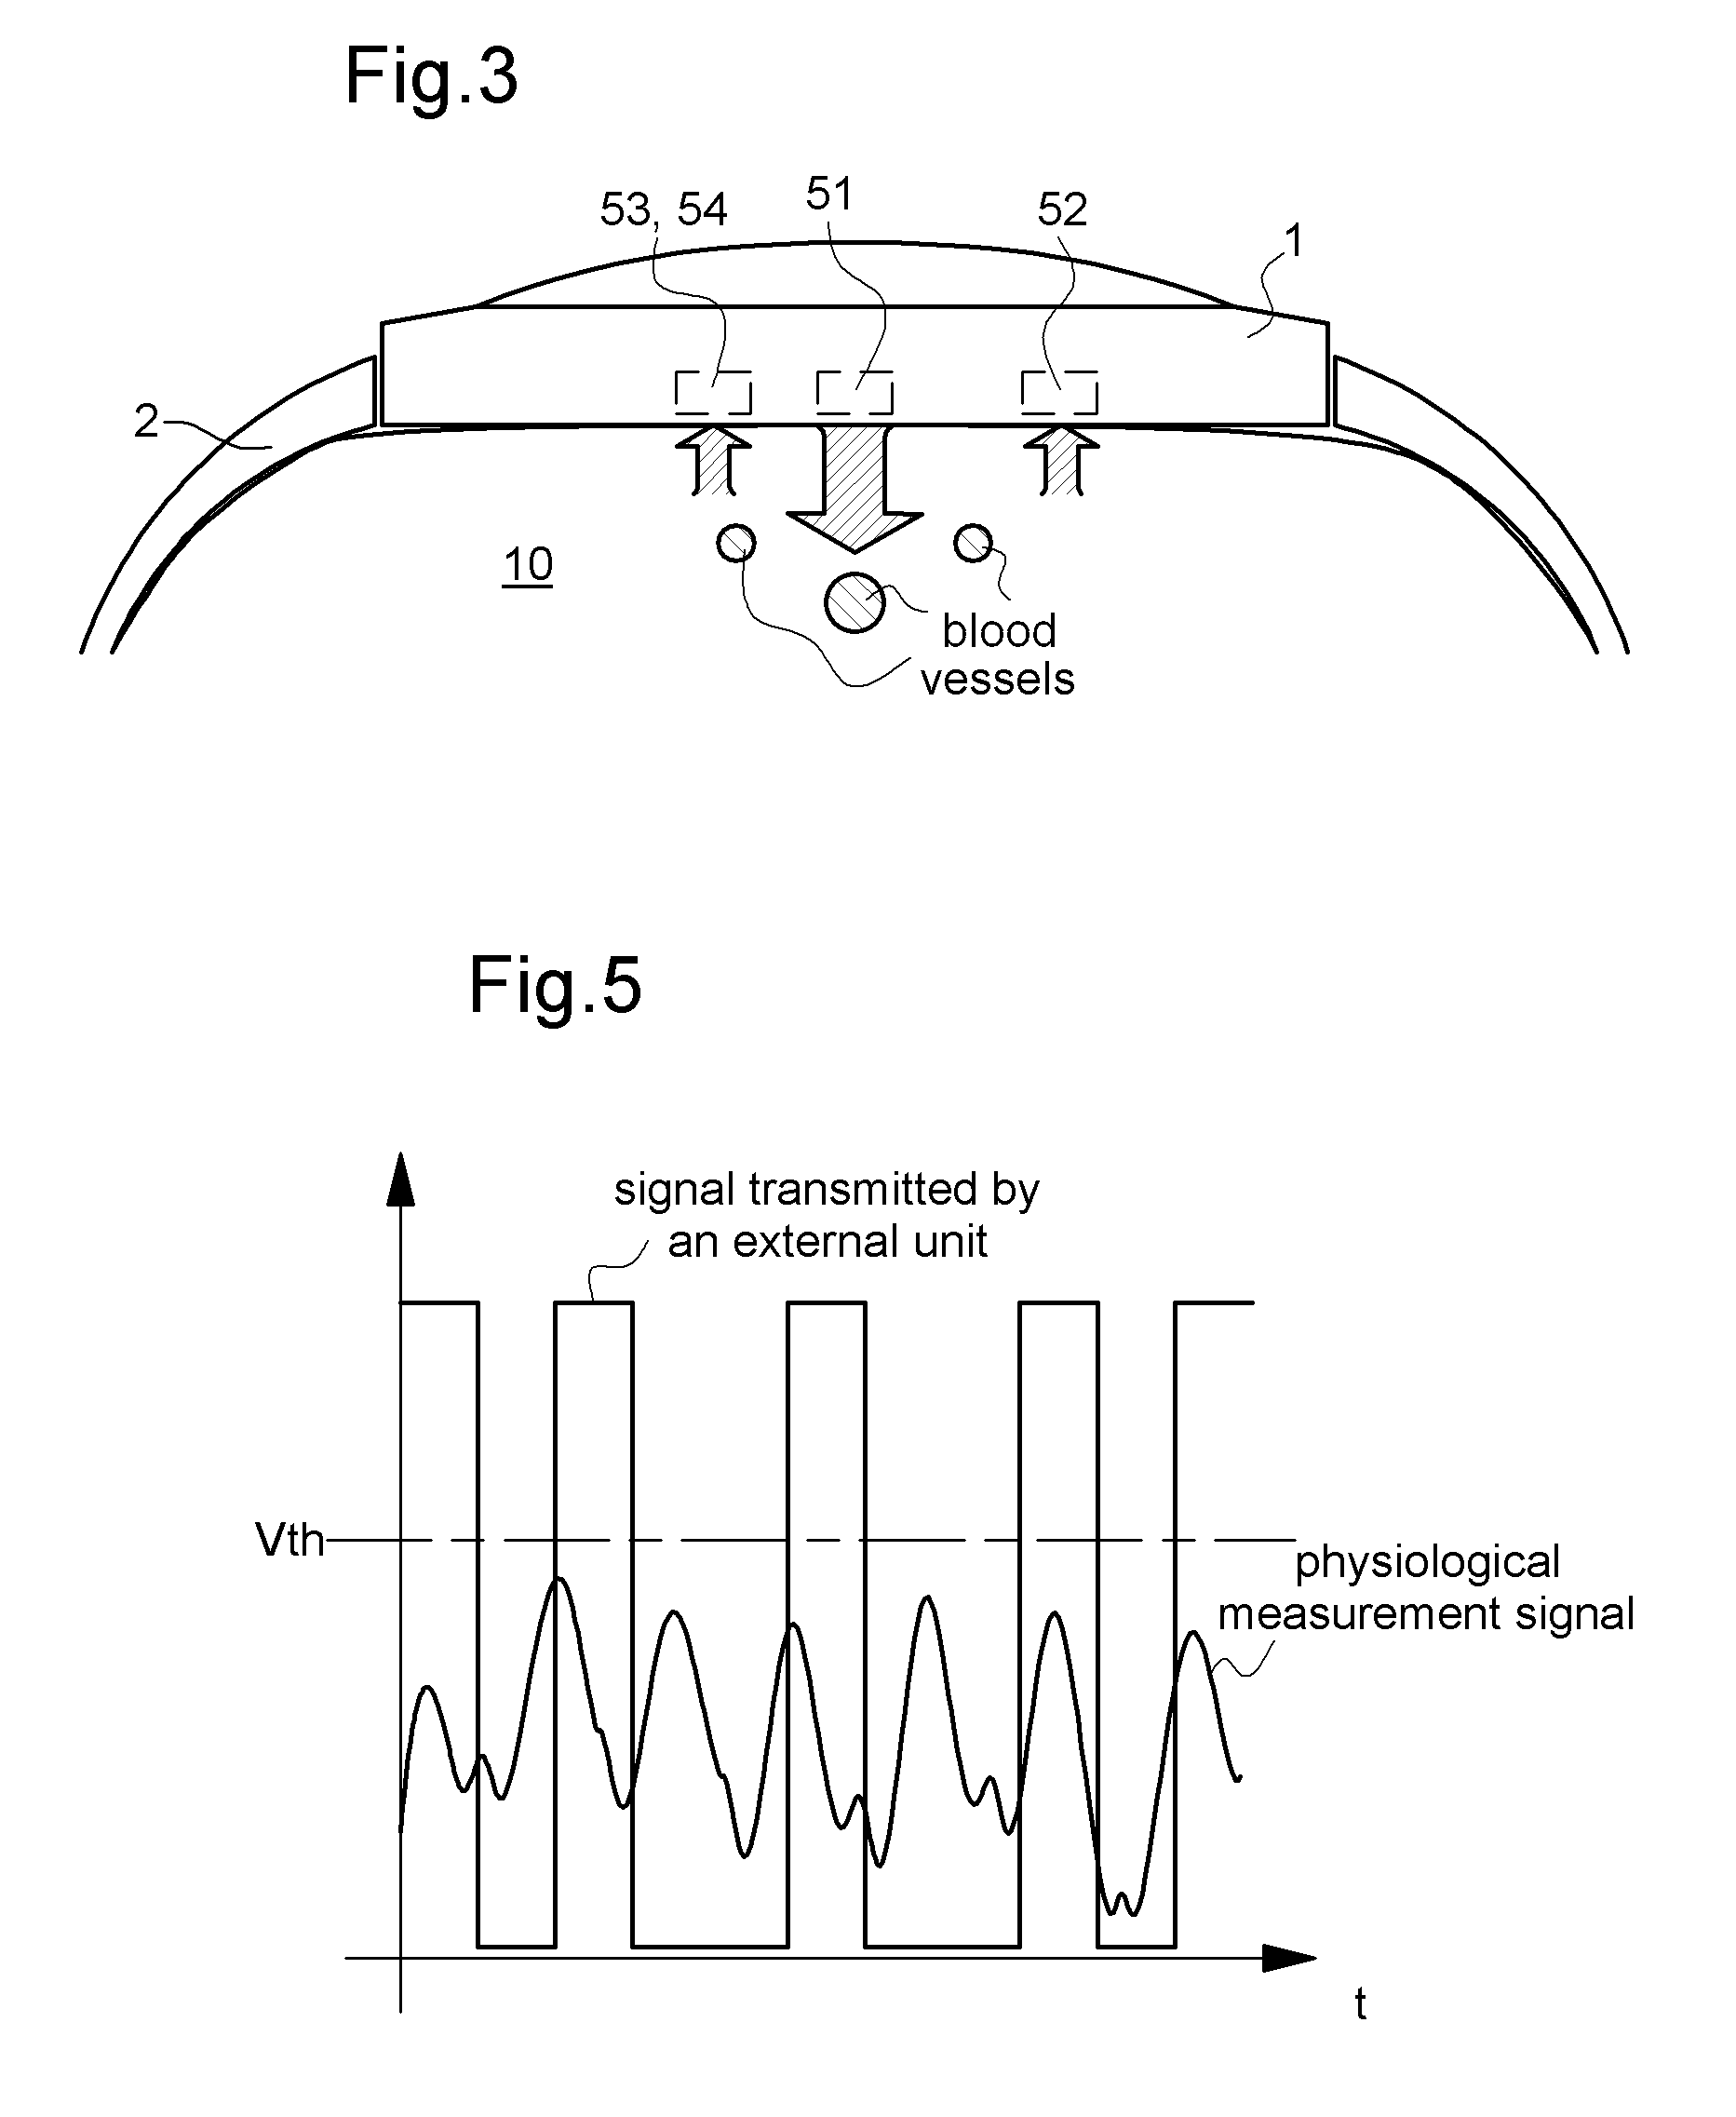 Instrument having optical device measuring a physiological quantity and means for transmitting and/or receiving data